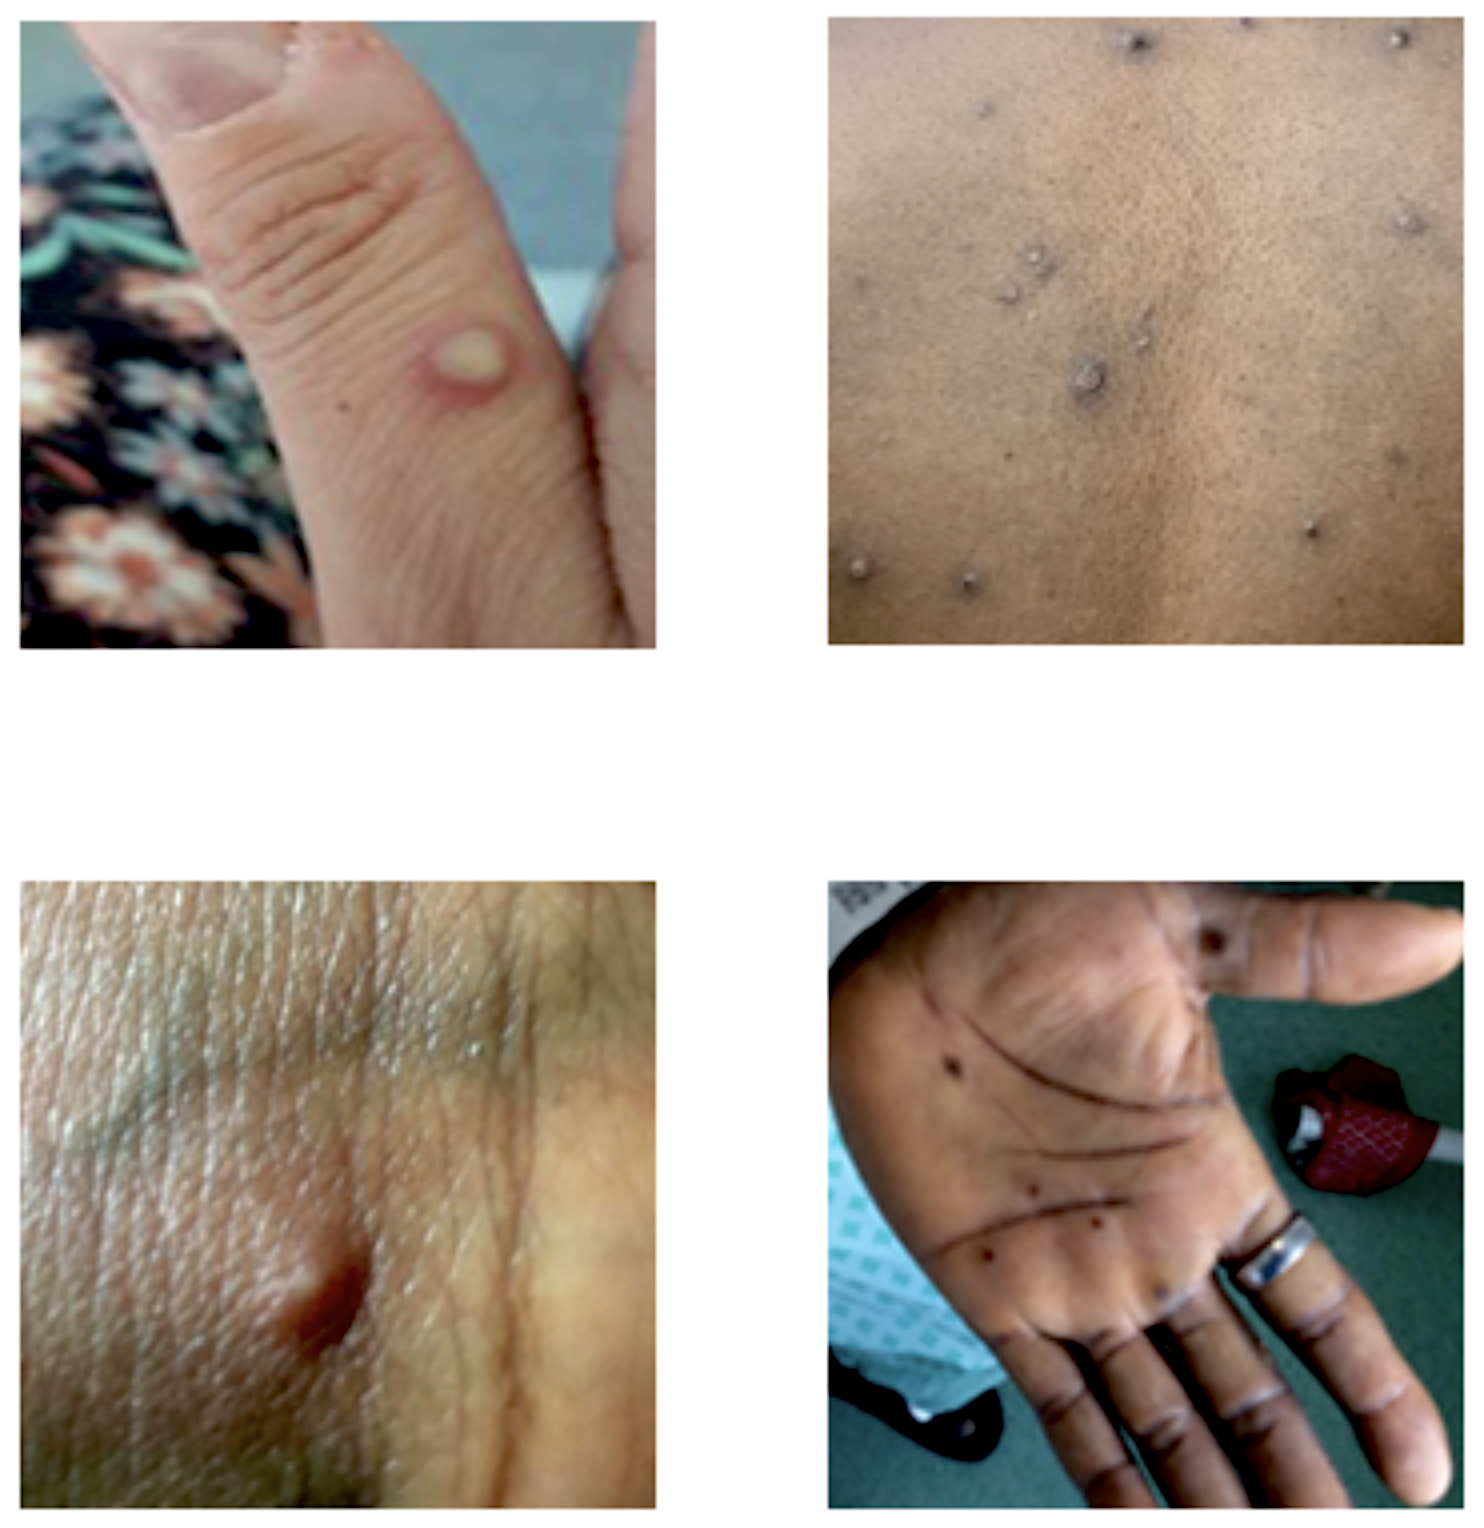 Images of mpox on skin surfaces